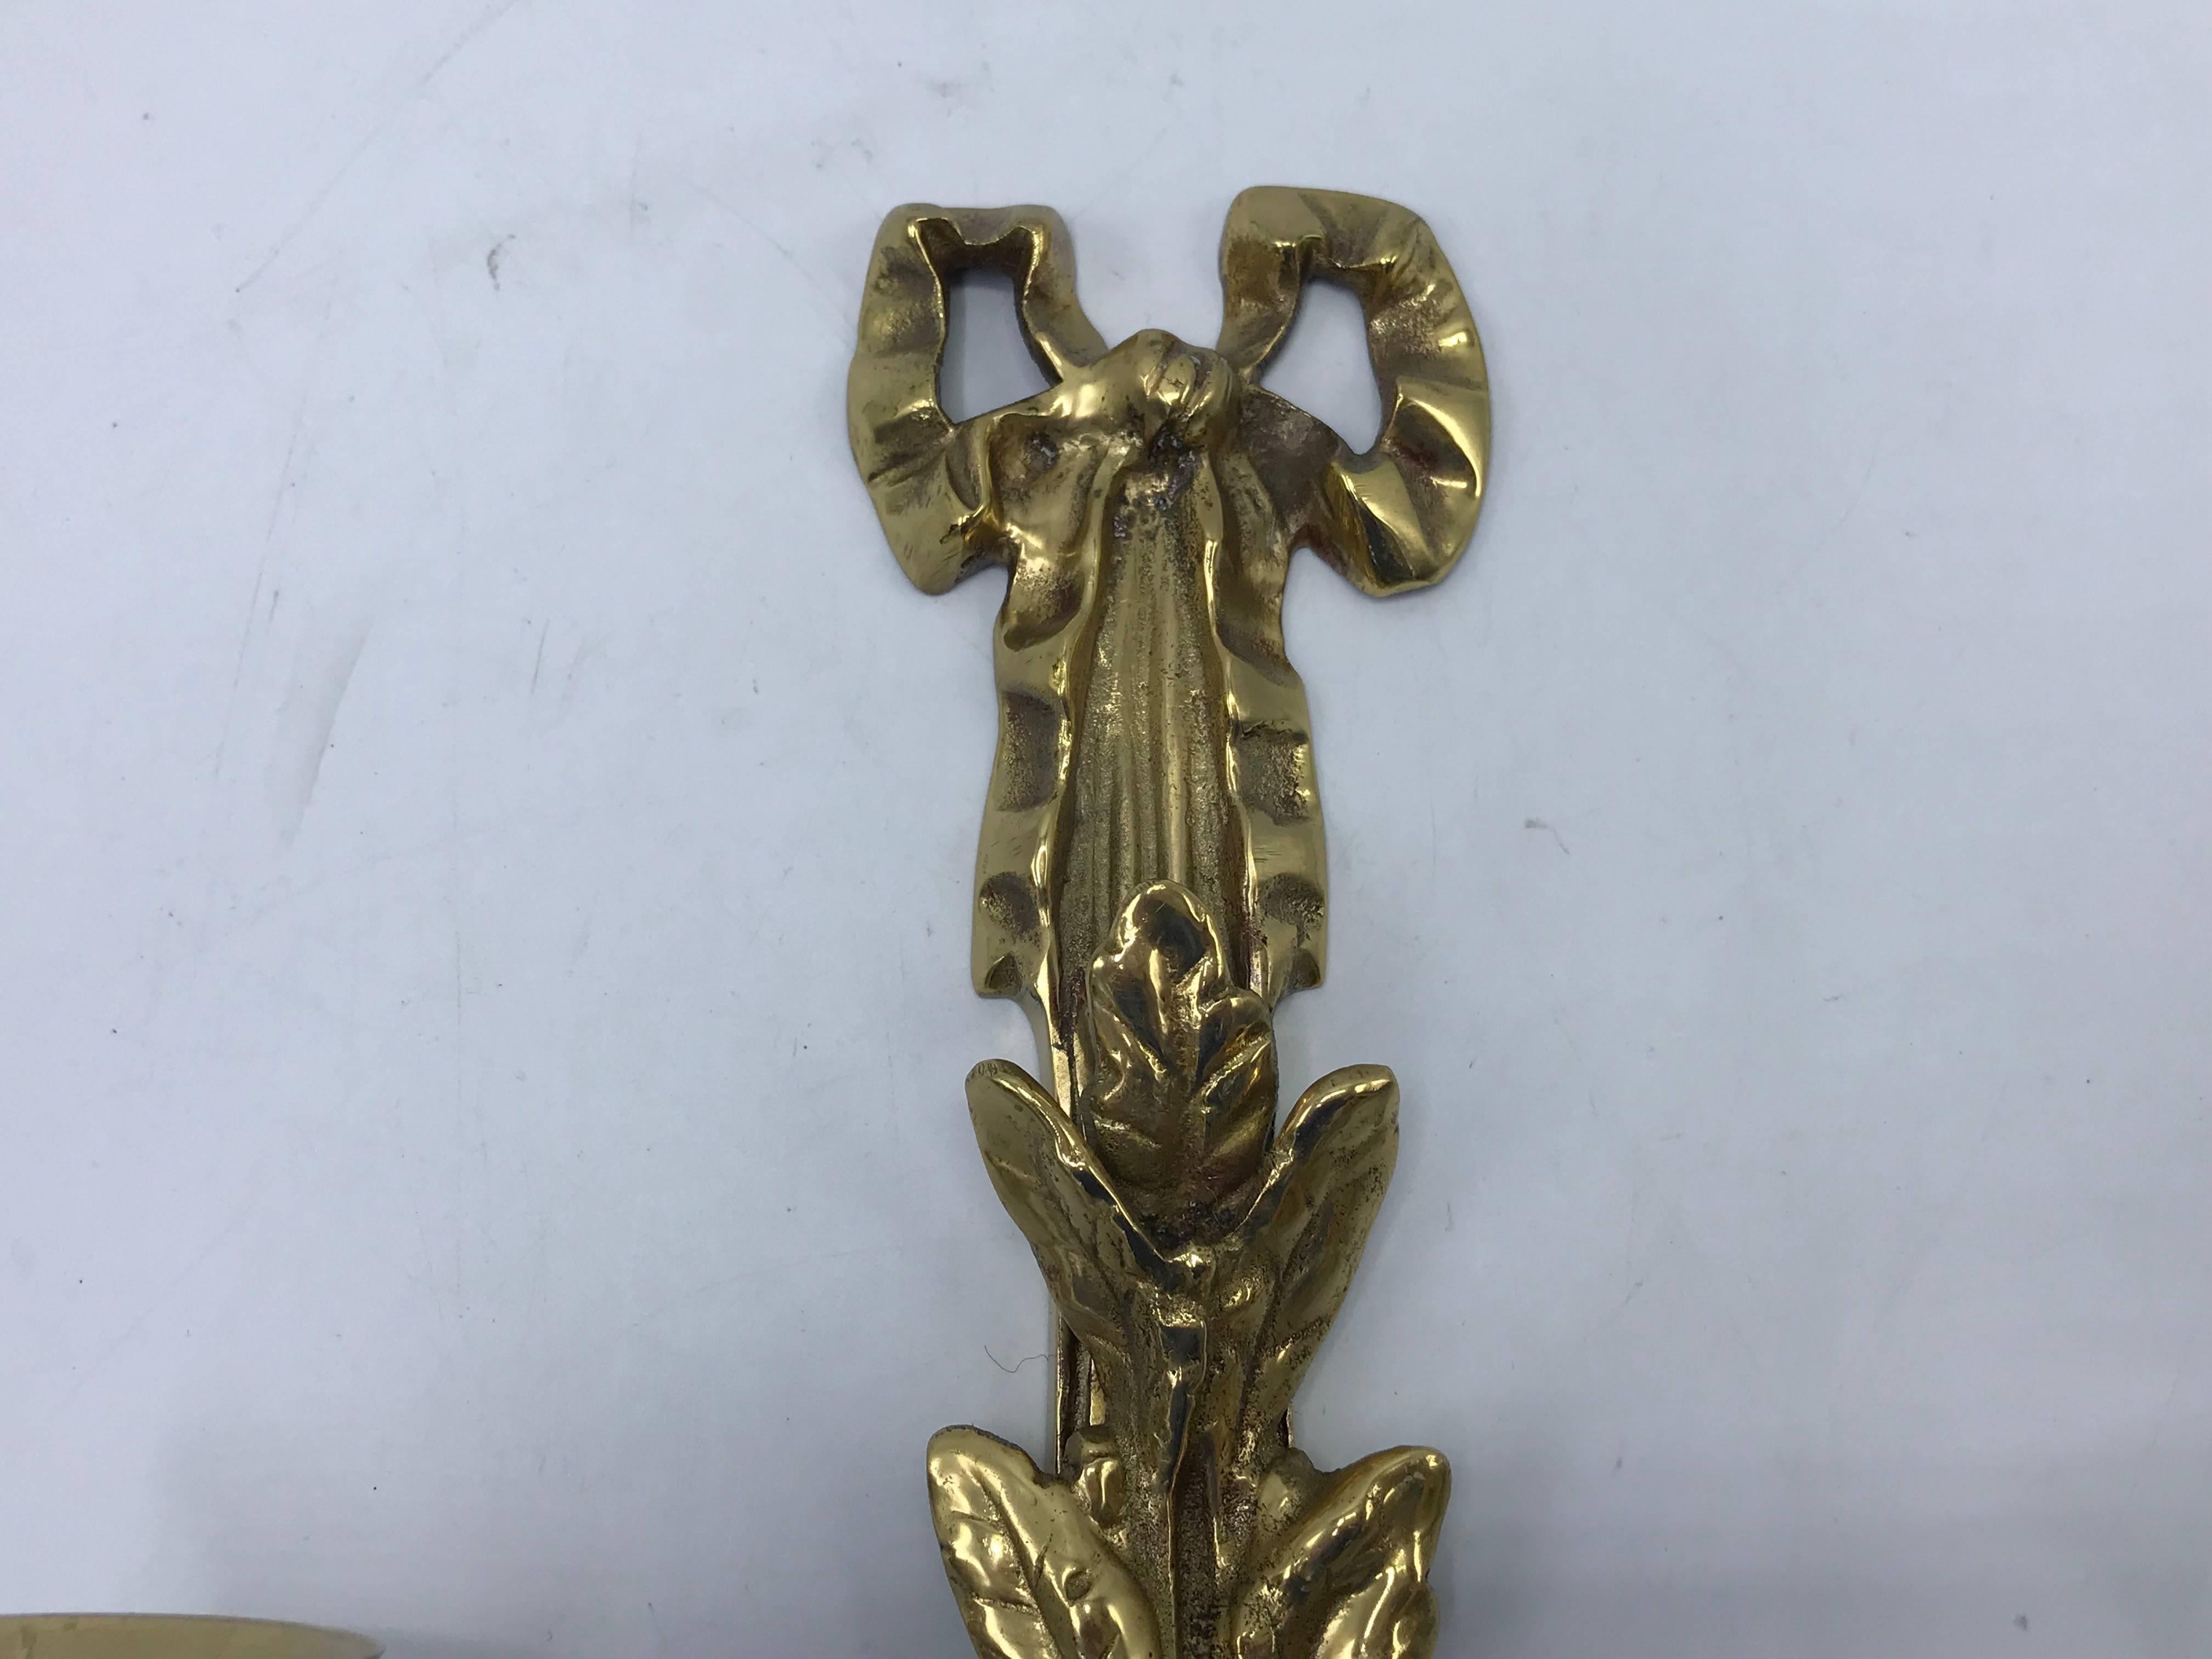 Listed is a fabulous, pair of 1960's solid-brass Italian candlestick wall sconces. The pair has a stunning laurel wreath motif with bow detailing along the top and tassel fringe detailing along the bottom. Heavy. 

We have another pair available,